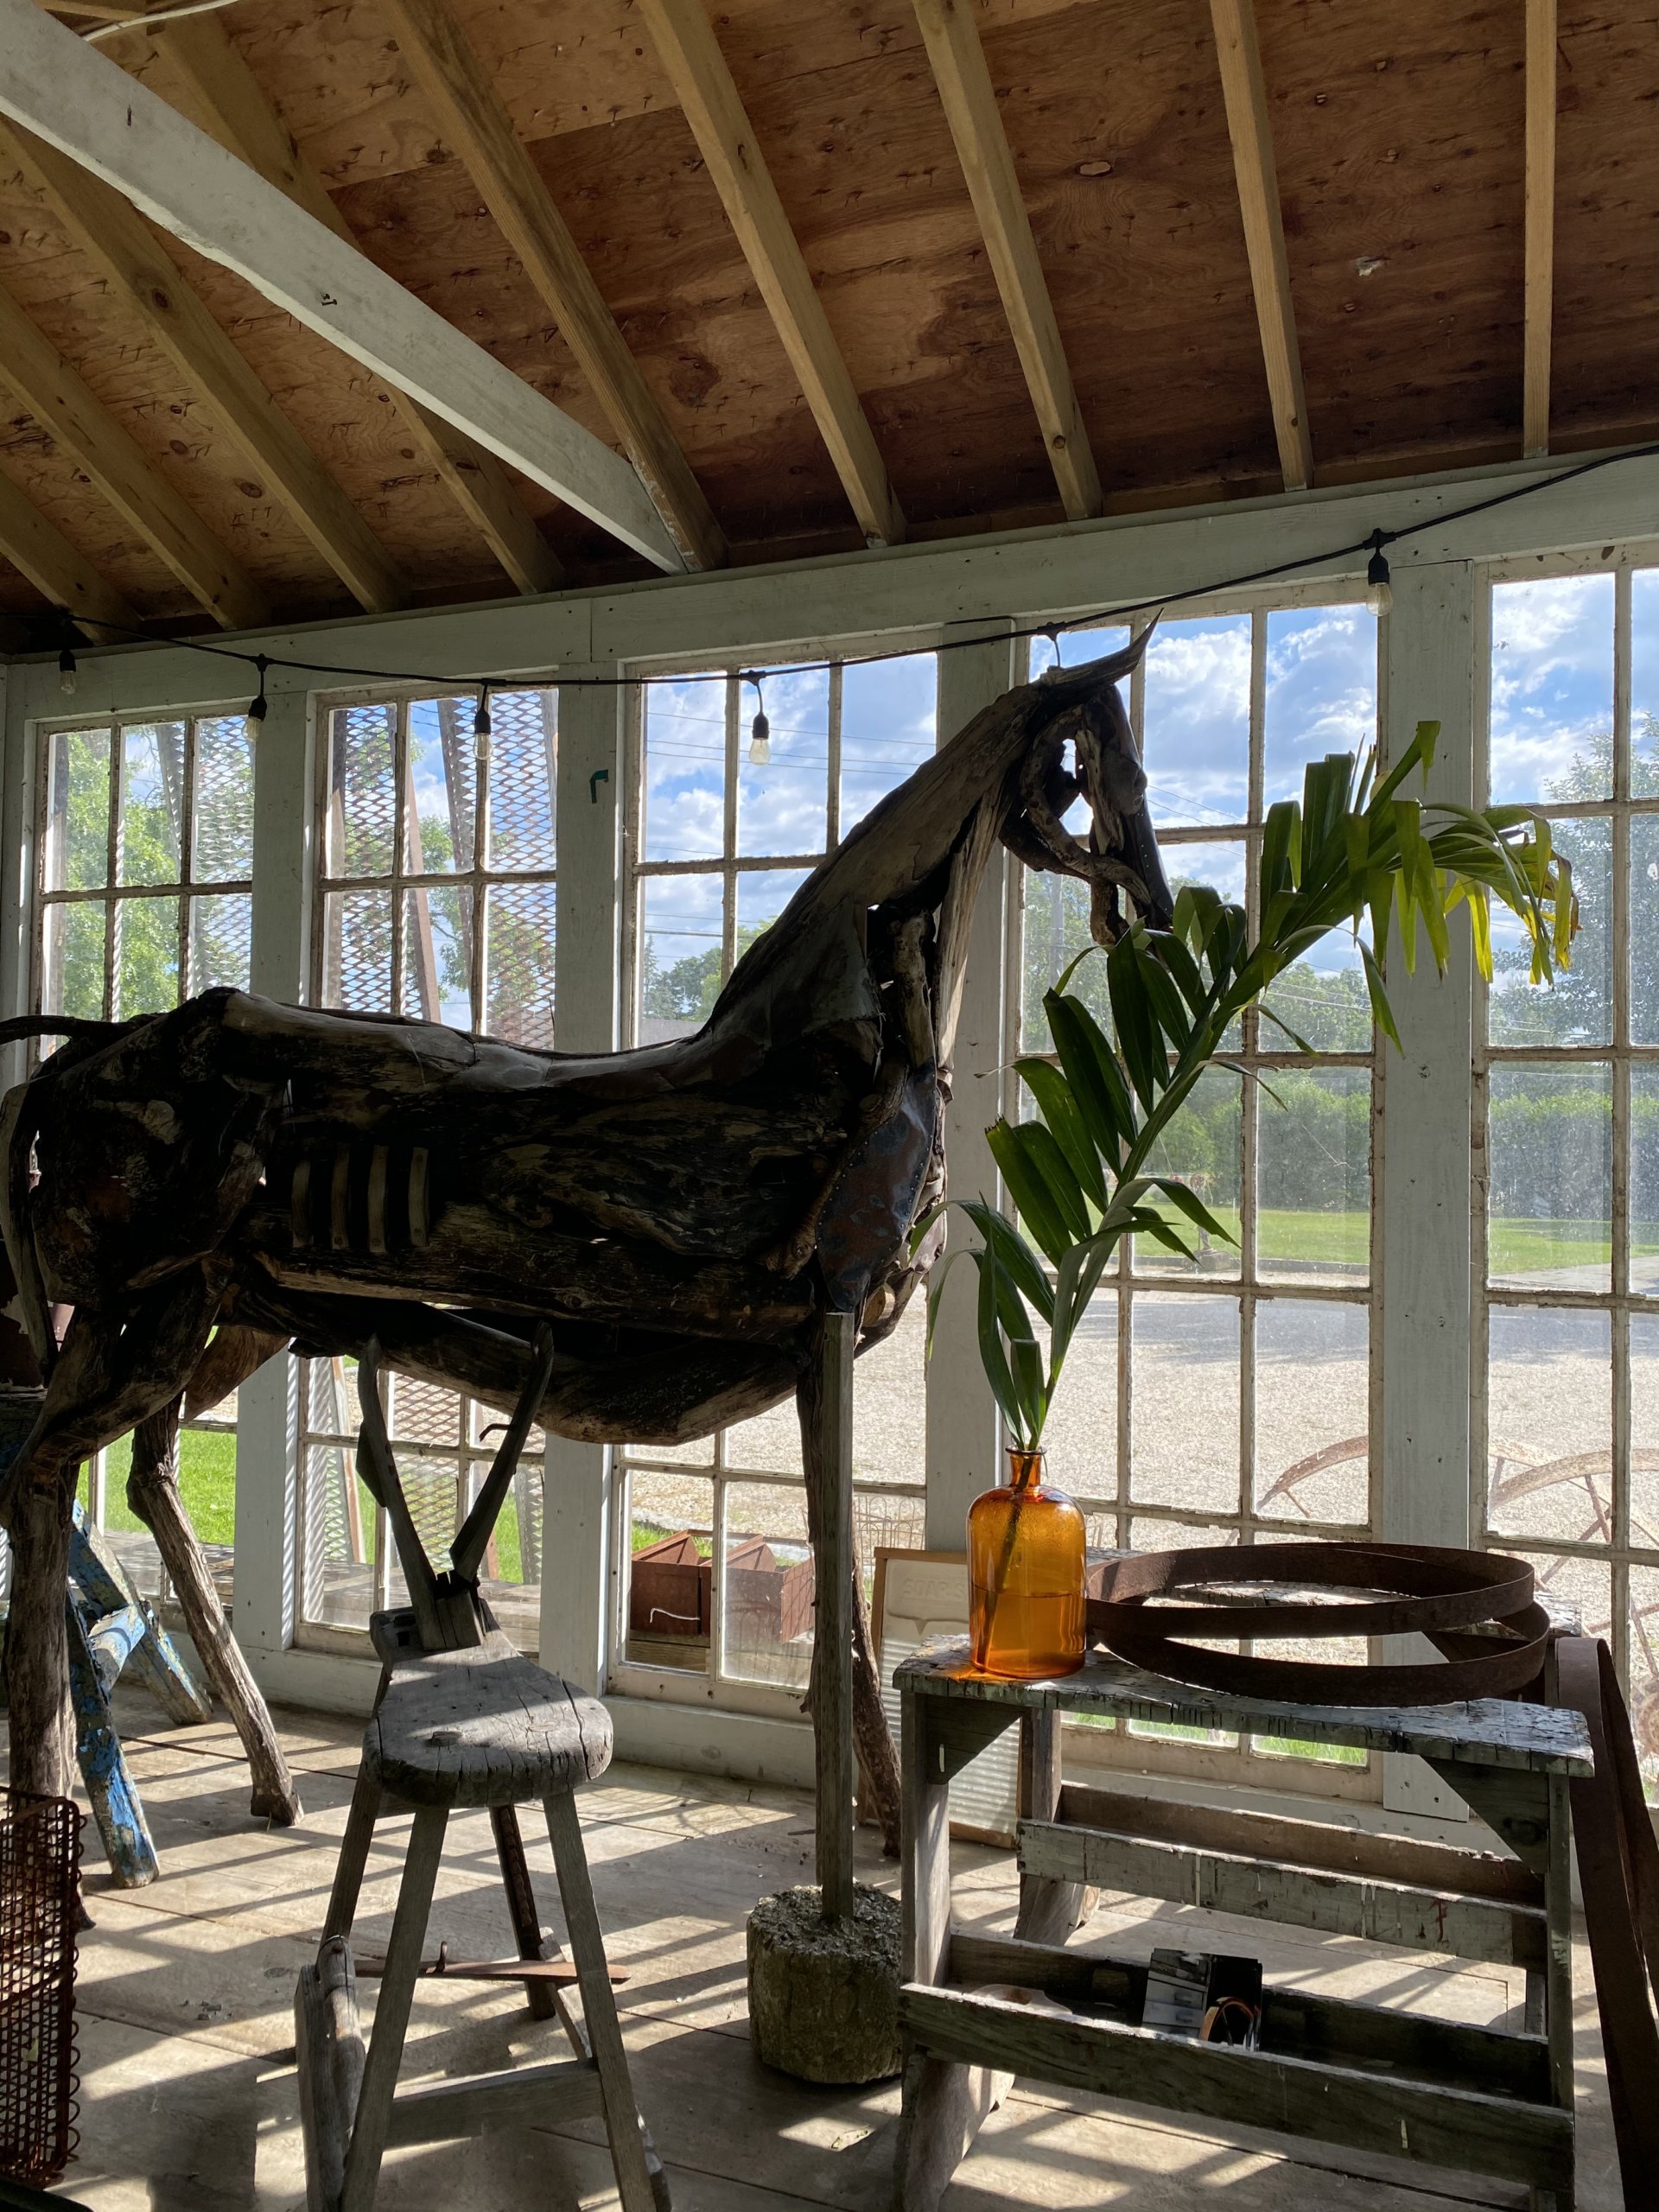 Franco Cuttica's horse sculpture in the glass shed at William Ris Gallery